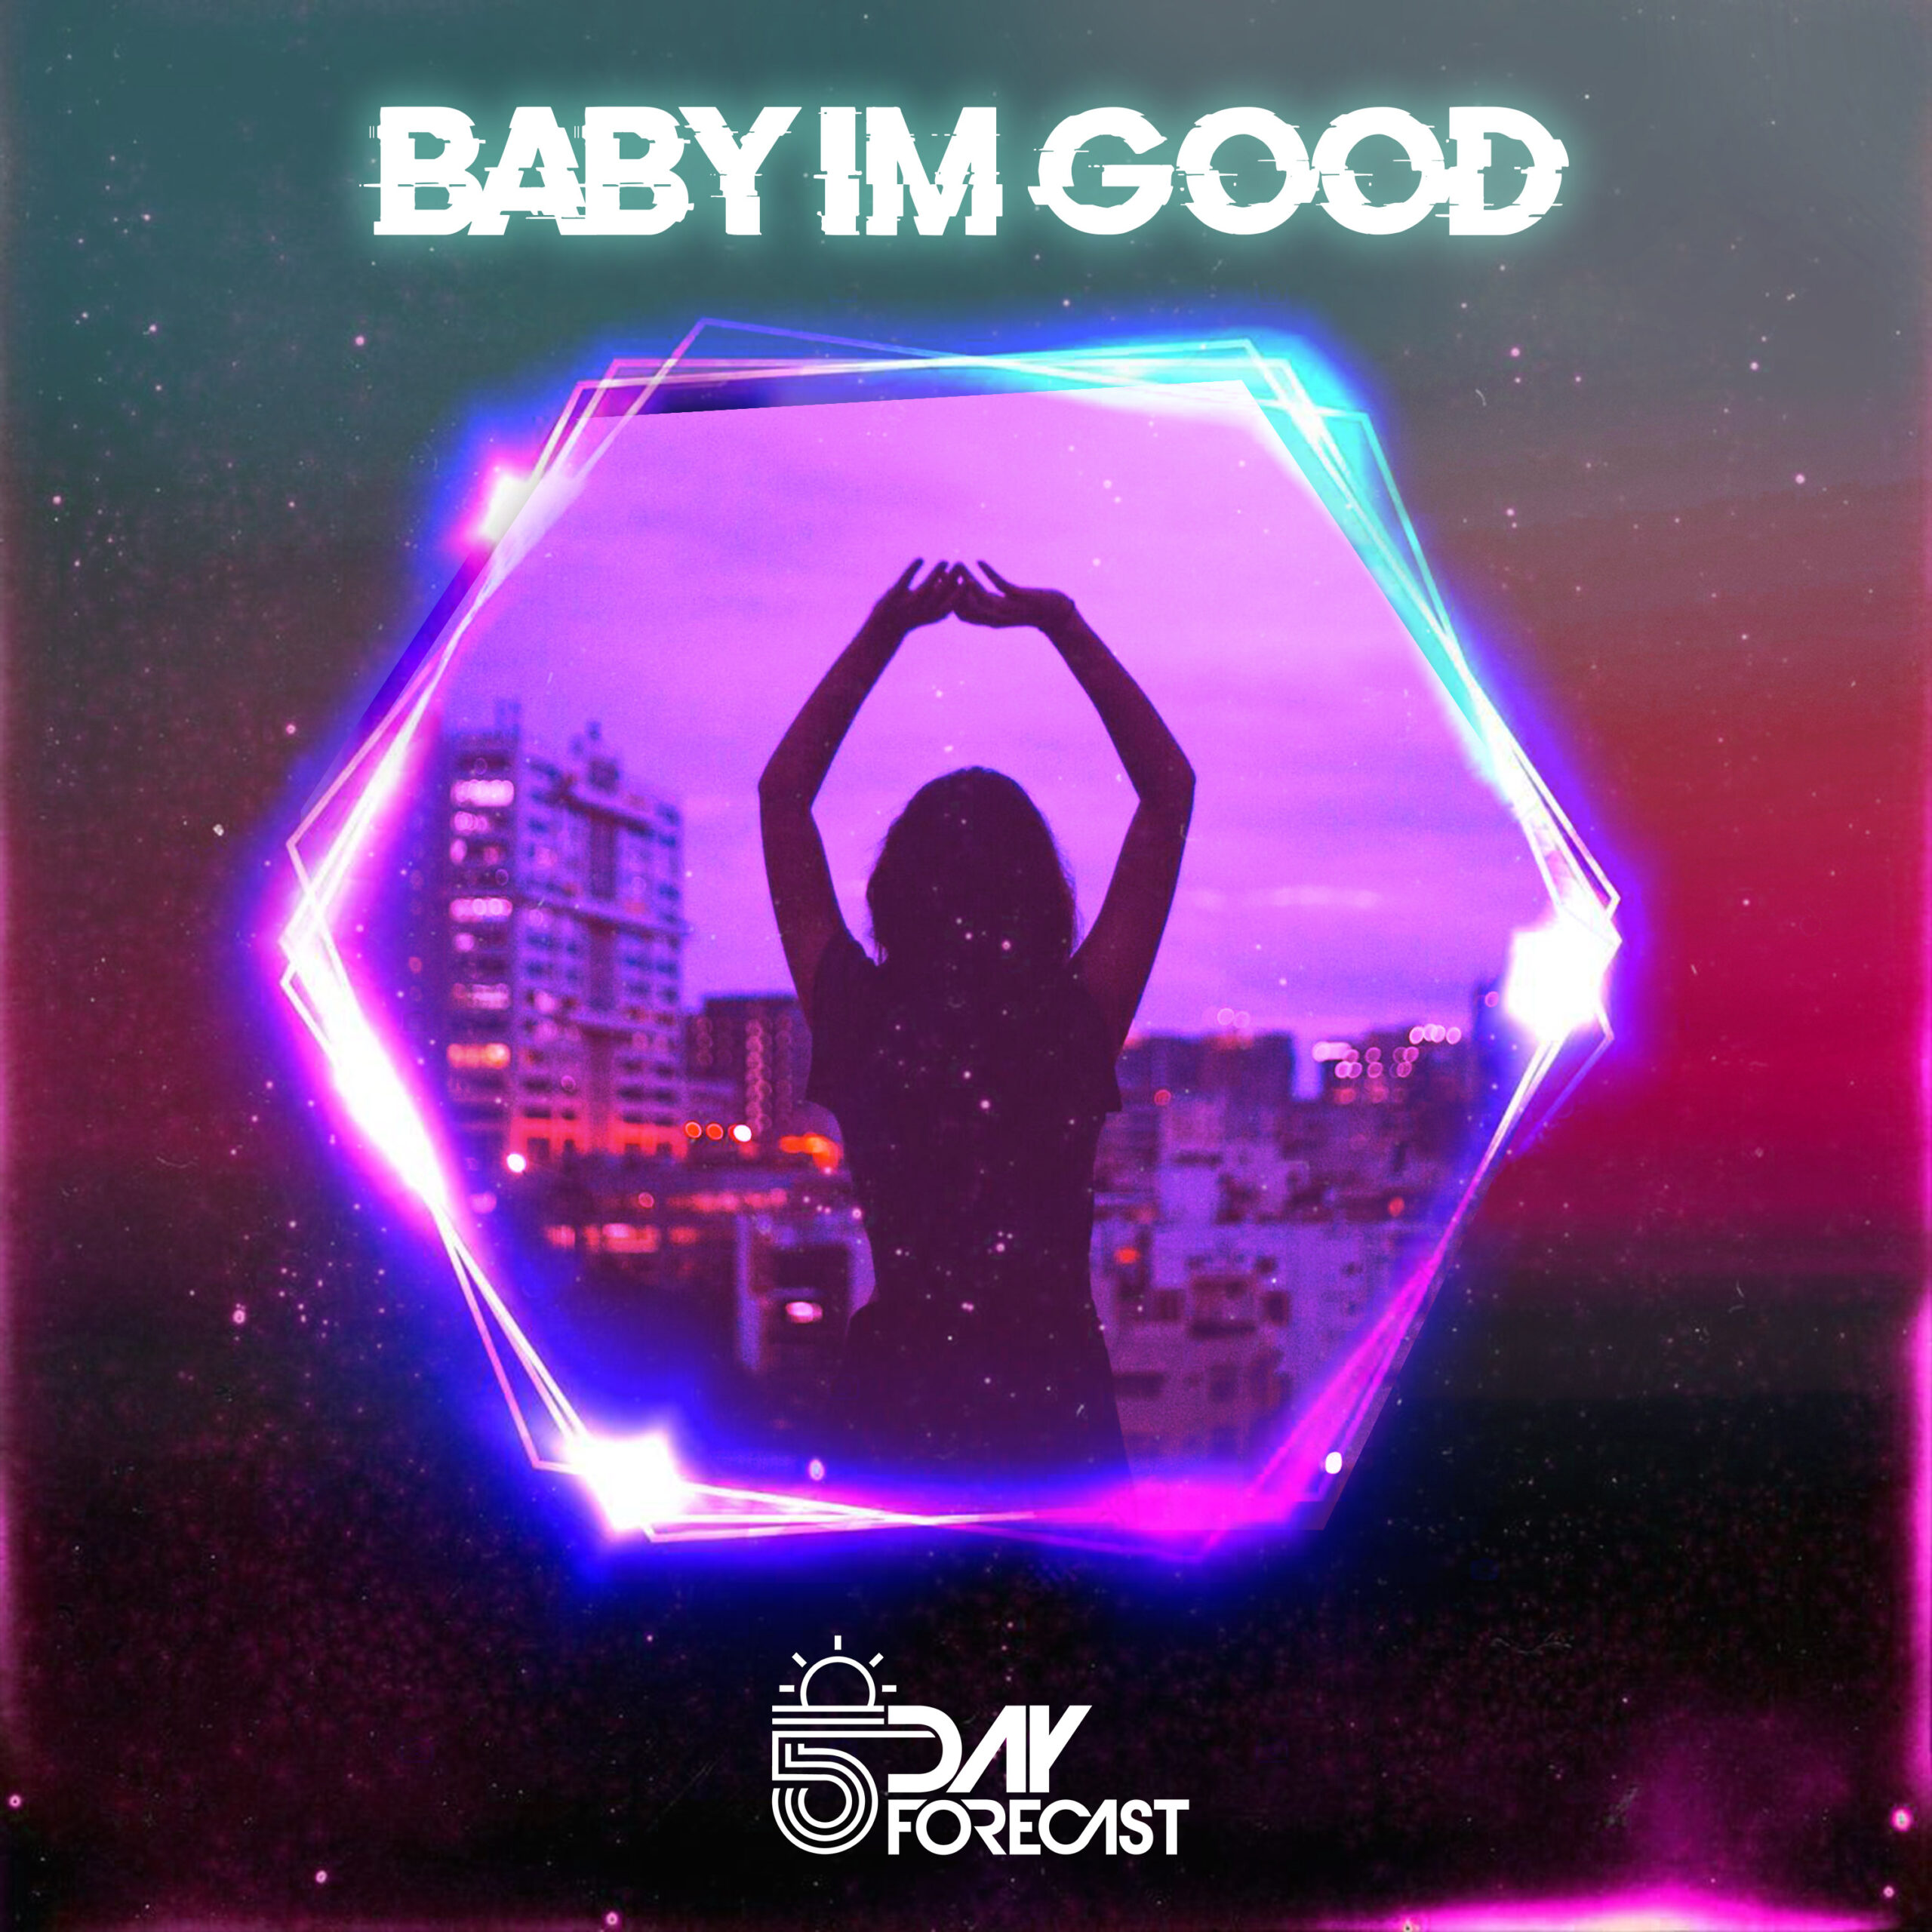 DJ 5 Day Forecast Shares Thoughts On Recent Success Of “Baby I’m Good”